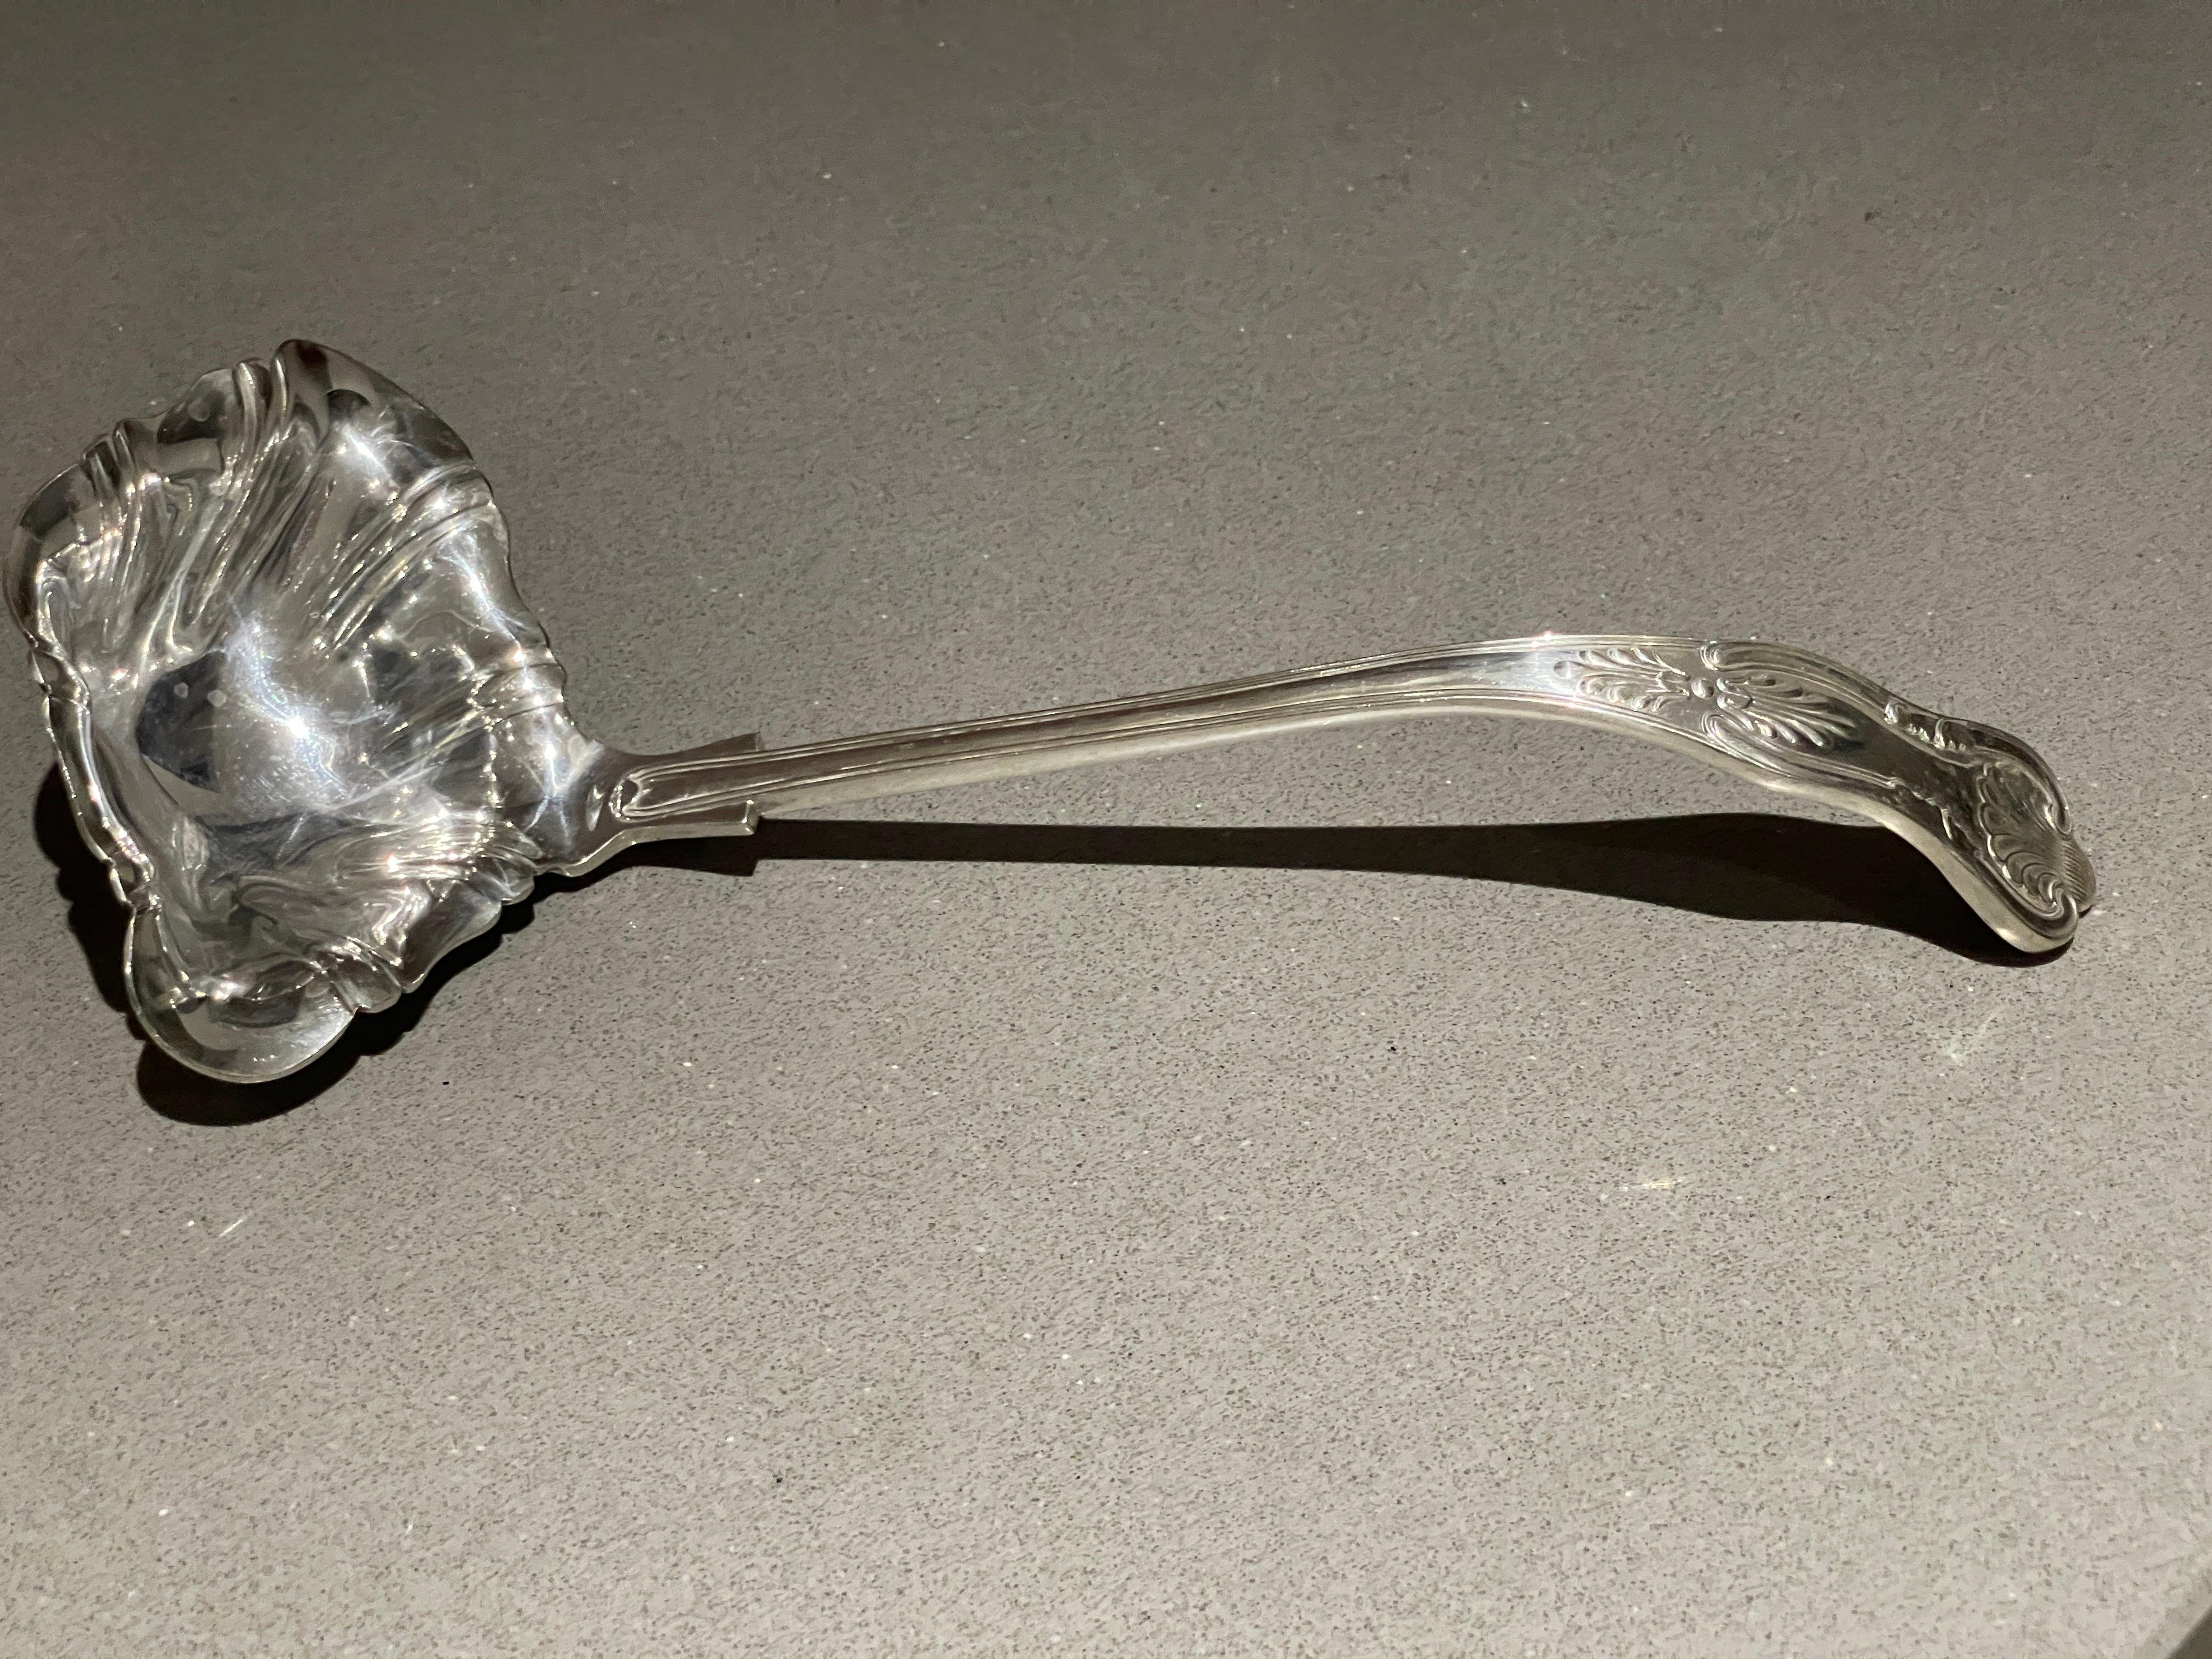 A hefty, exceptional, fine, and impressive antique Edwardian English silver plated Queen's pattern soup ladle is an addition to our silver cutlery collection.

This exceptional antique Edwardian silver soup ladle has been crafted in the Queen's